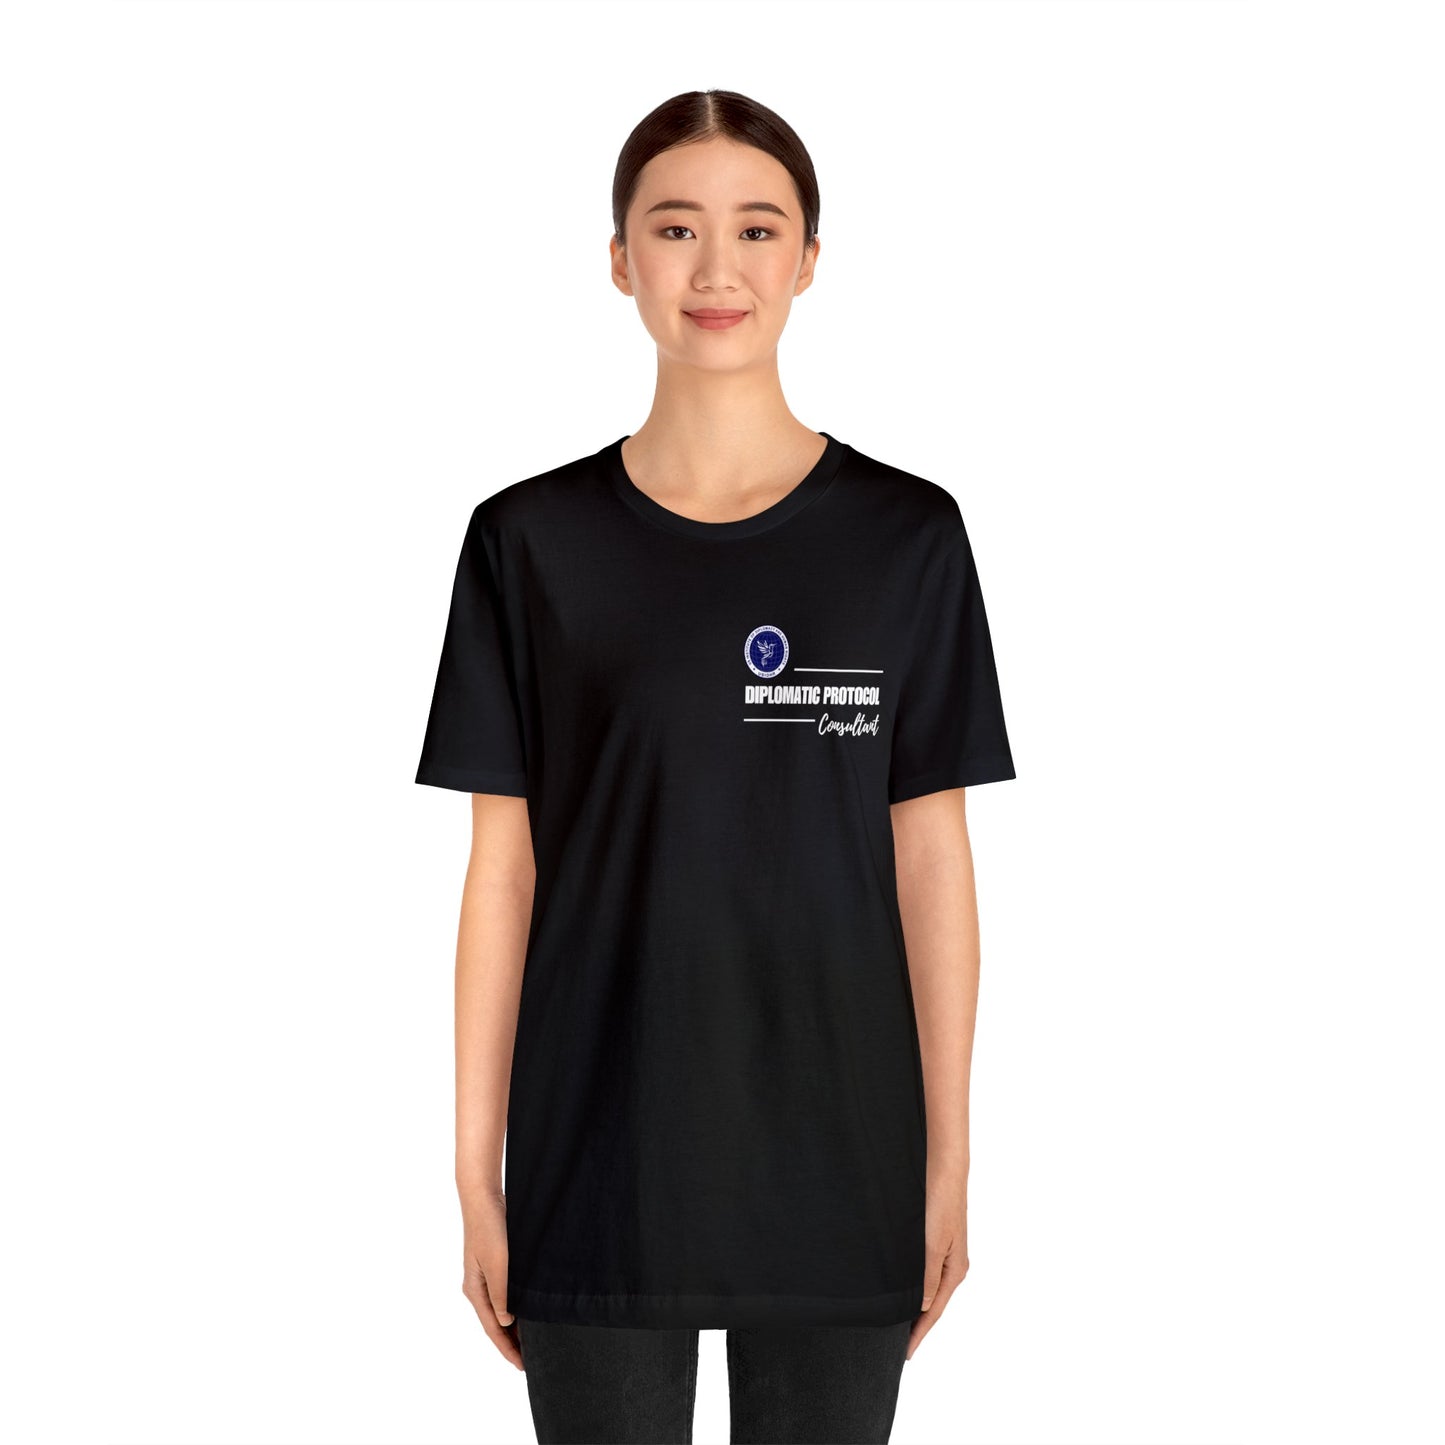 Diplomatic Protocol Consultant Short Sleeve Tee